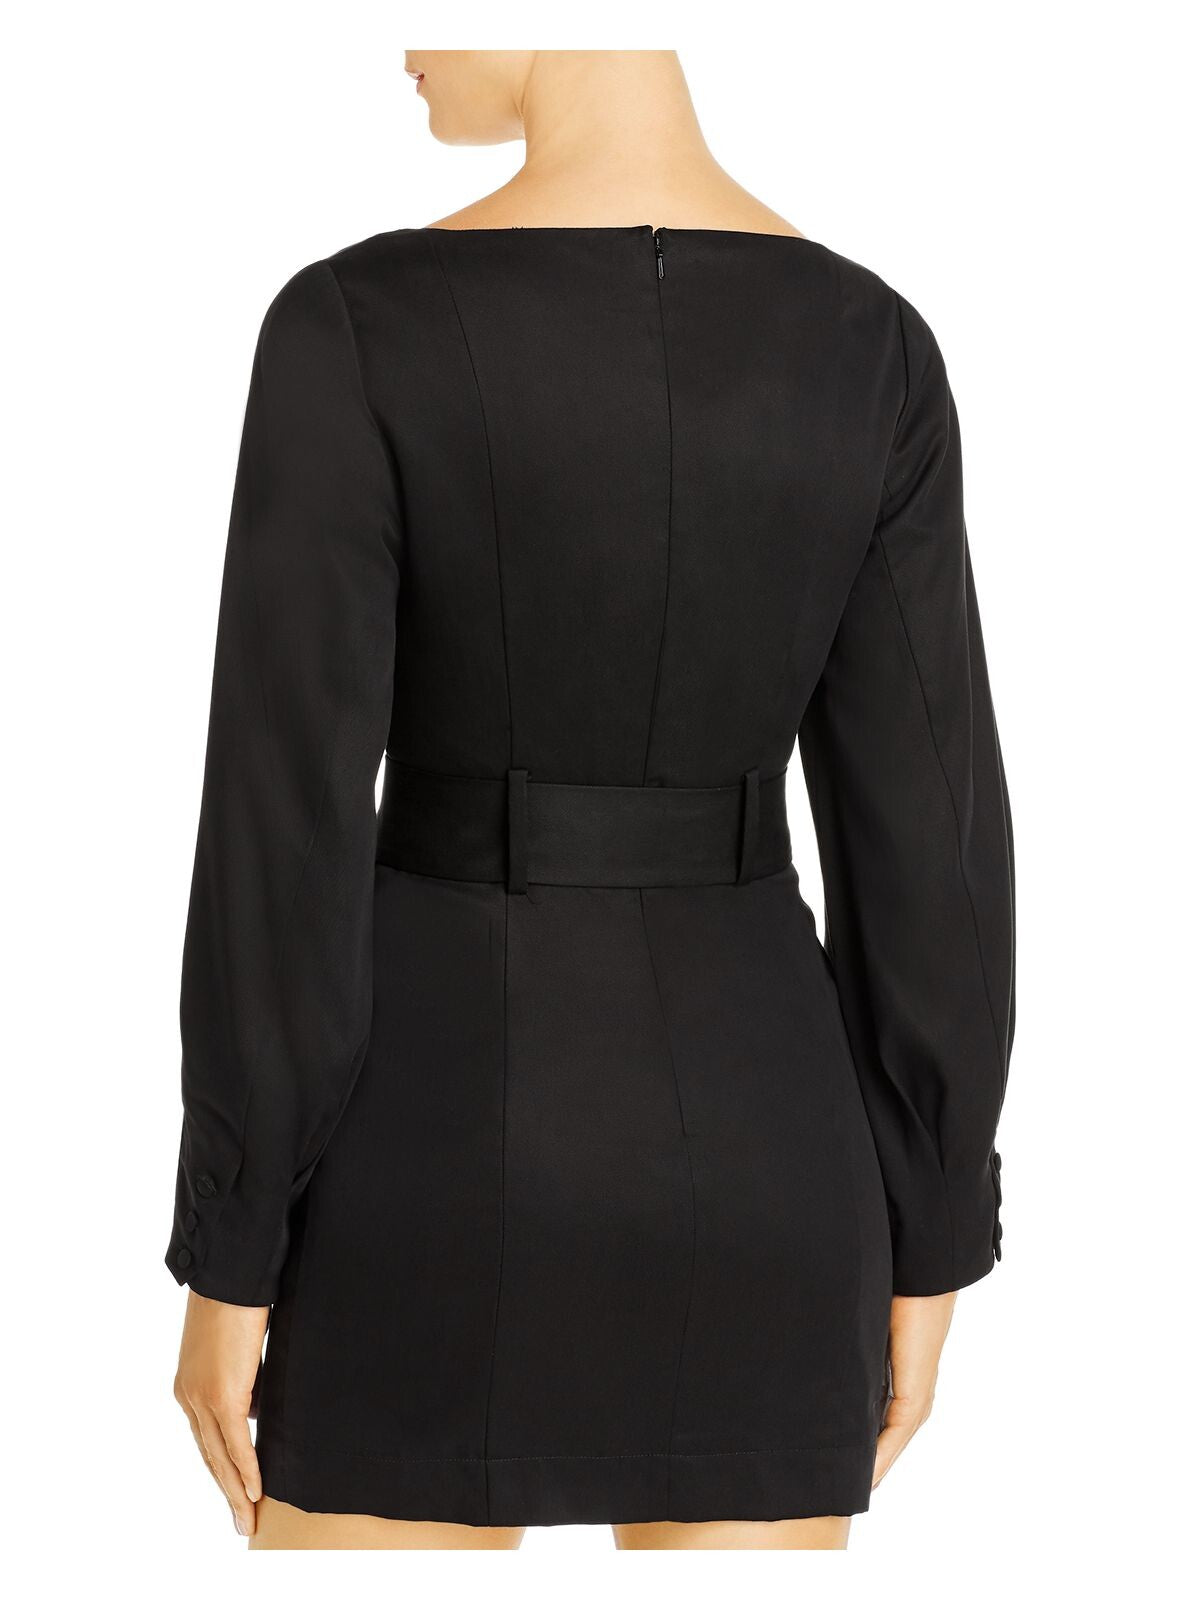 FAME AND PARTNERS Womens Black Long Sleeve Queen Anne Neckline Mini Cocktail Sheath Dress 8